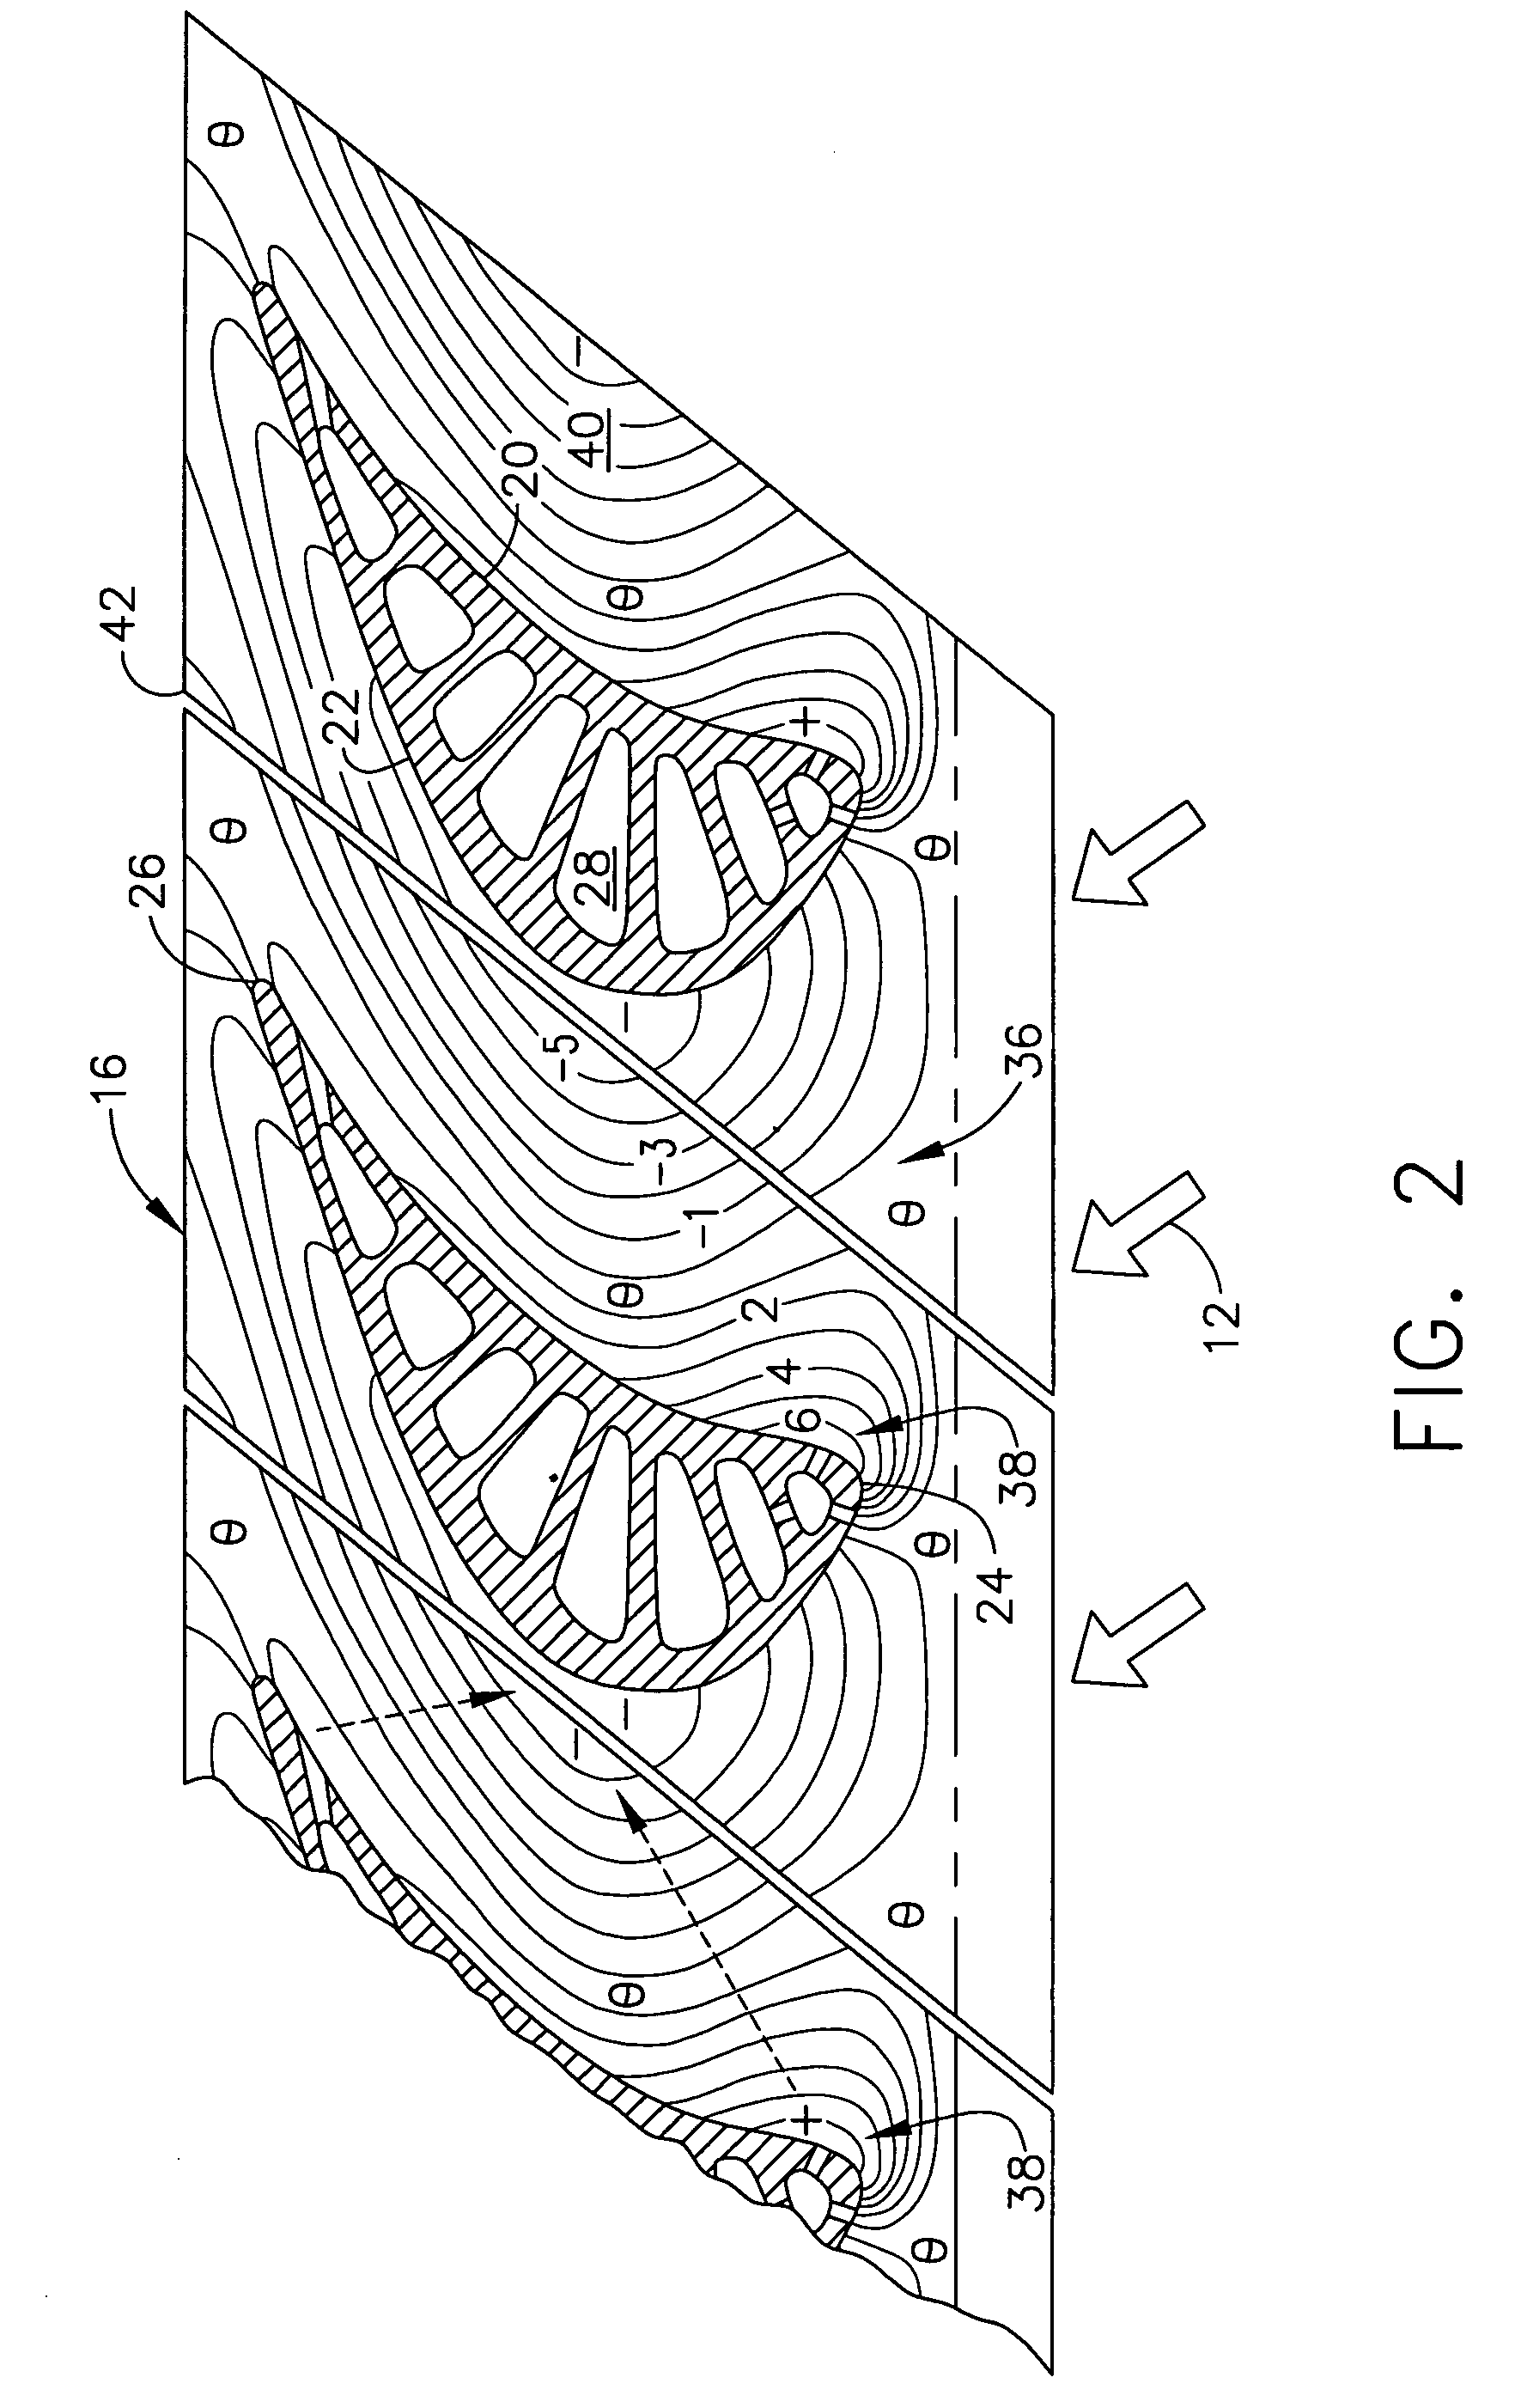 Scalloped surface turbine stage